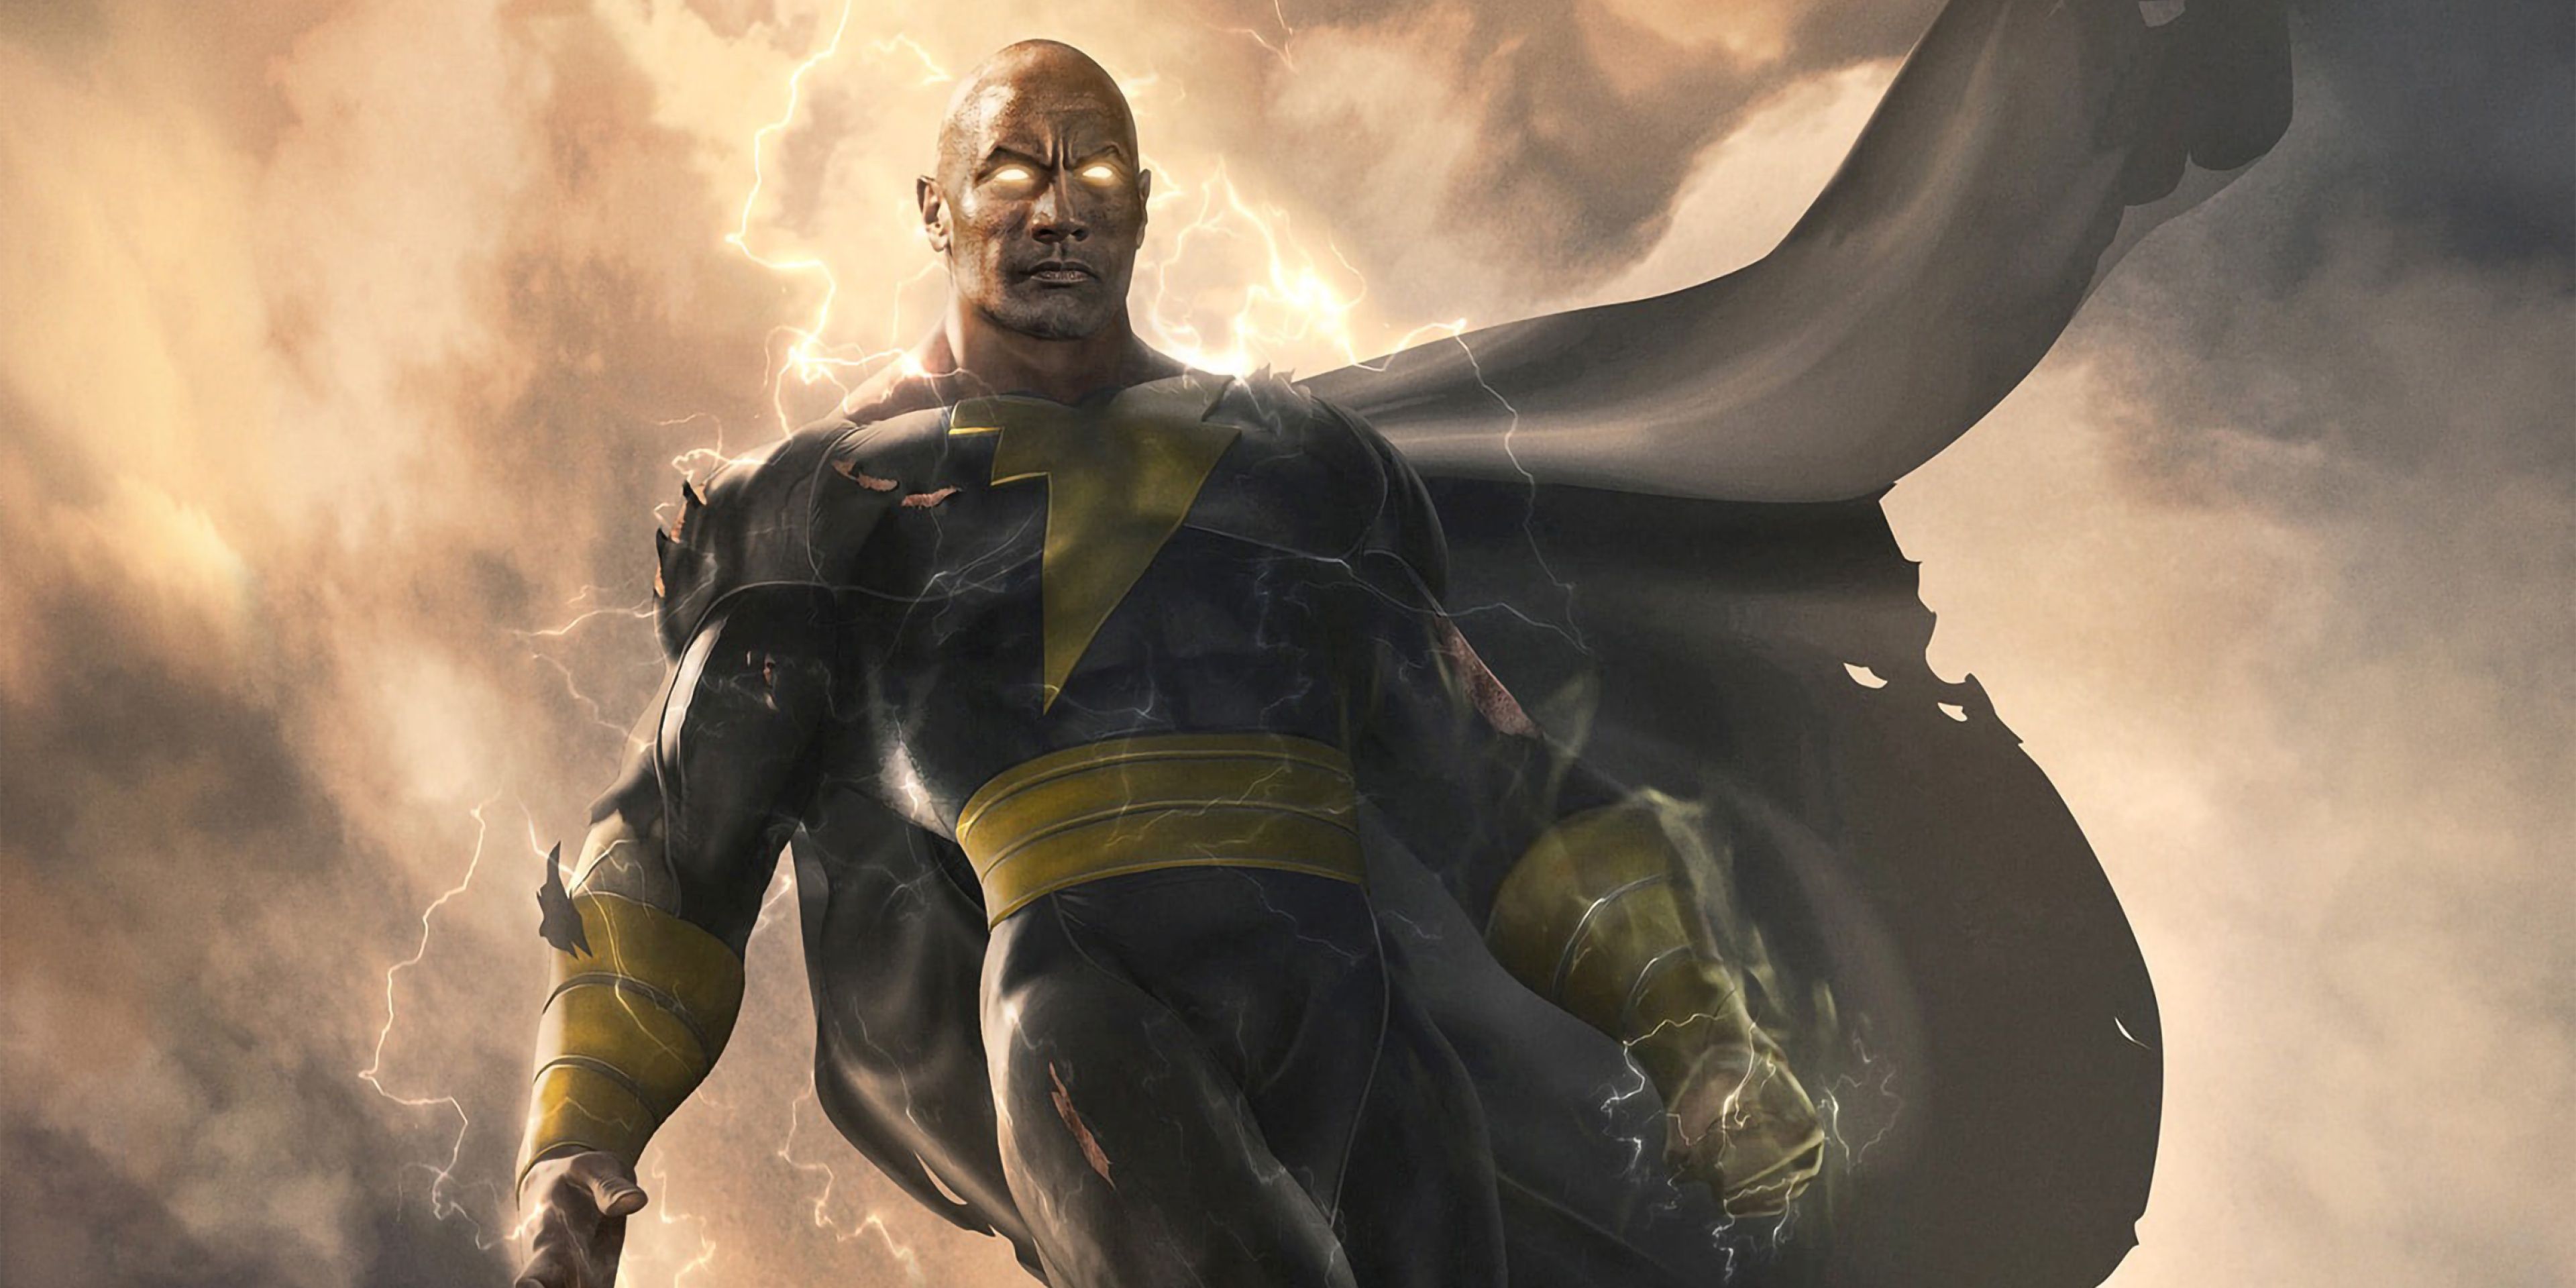 Black Adam Plot Release Date & News to Know RELATED Black Adam Pierce Brosnans Doctor Fate Costume Is a CGI Creation RELATED The Rock Fast & Furious Writer Team for Holiday Adventure Red One